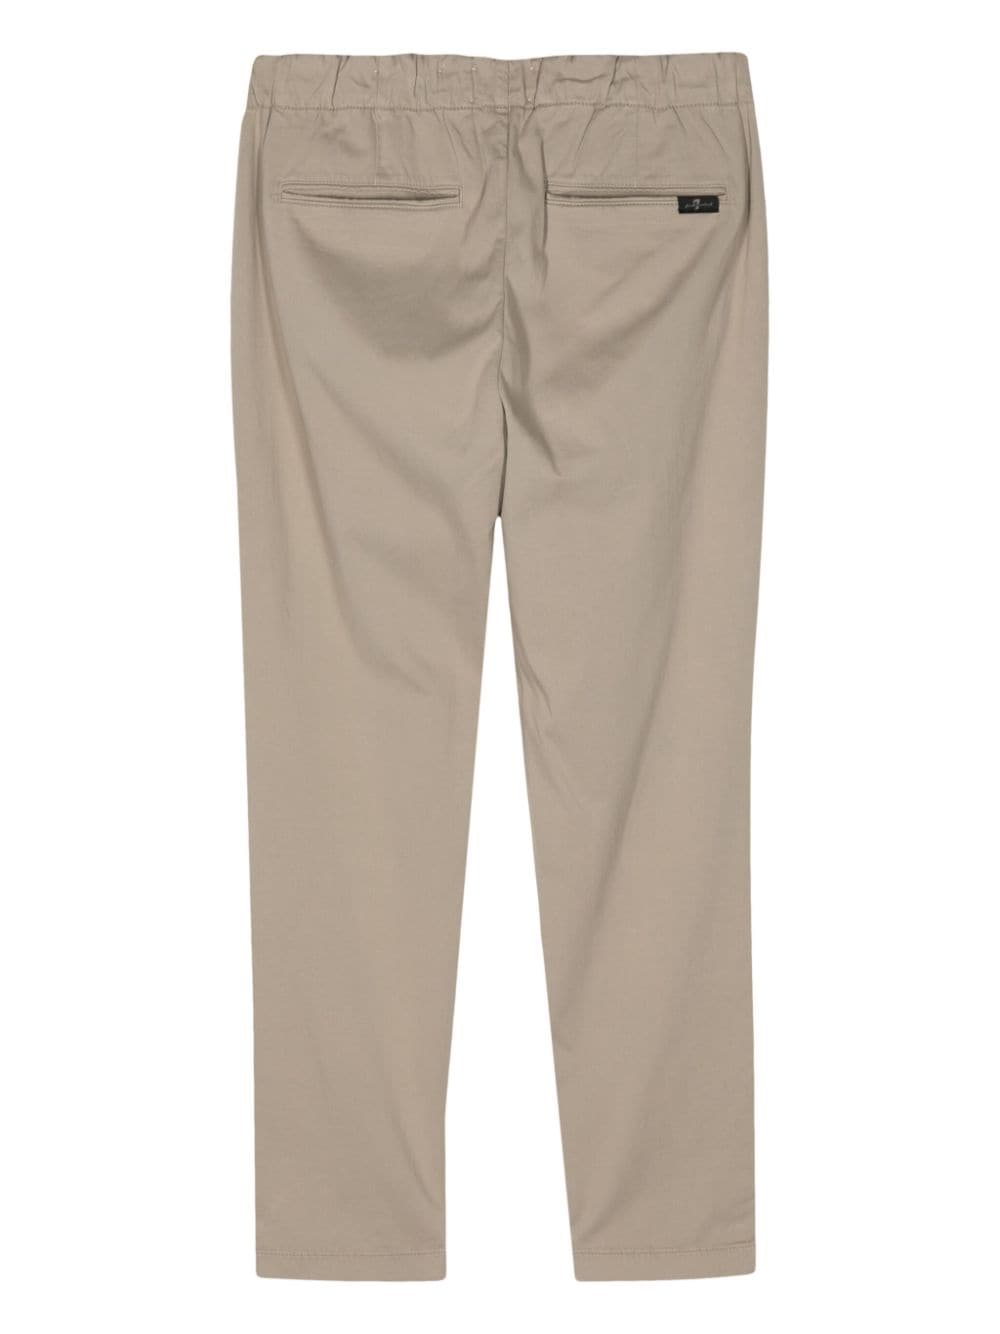 7 For All Mankind tapered-leg cotton trousers - Beige